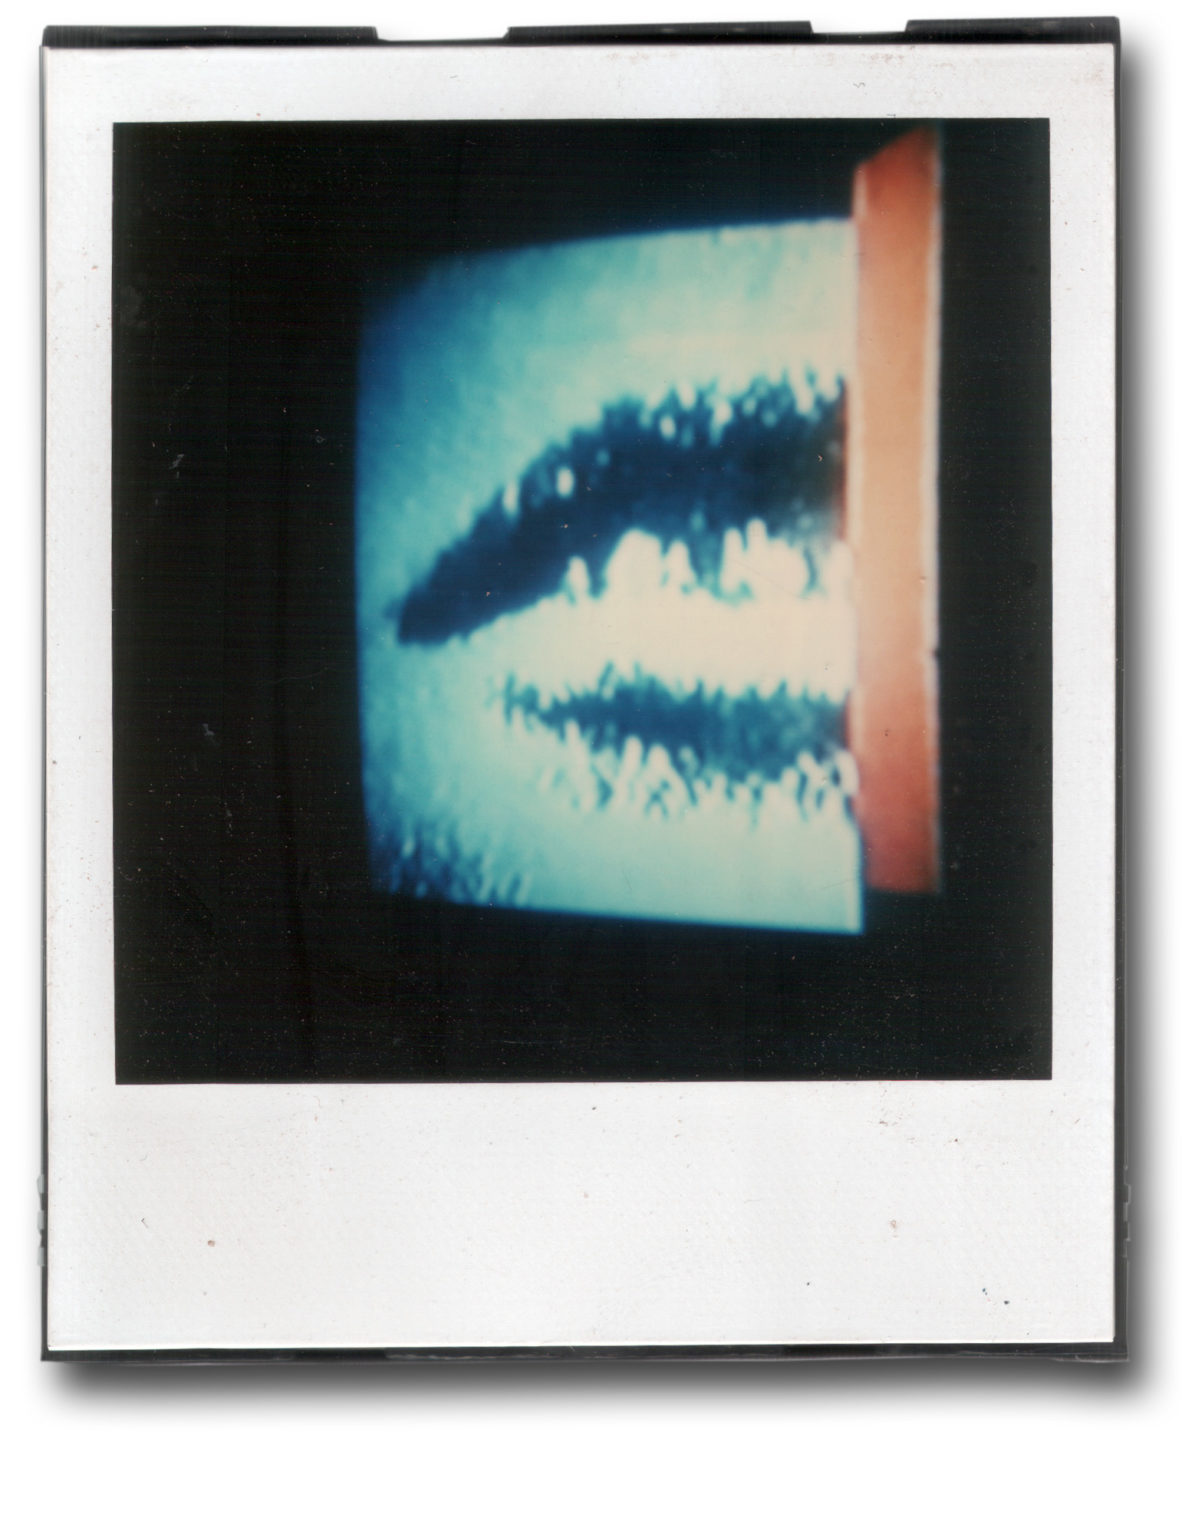 Andre Werner TV blue triptych, SX70,polaroid, 1988